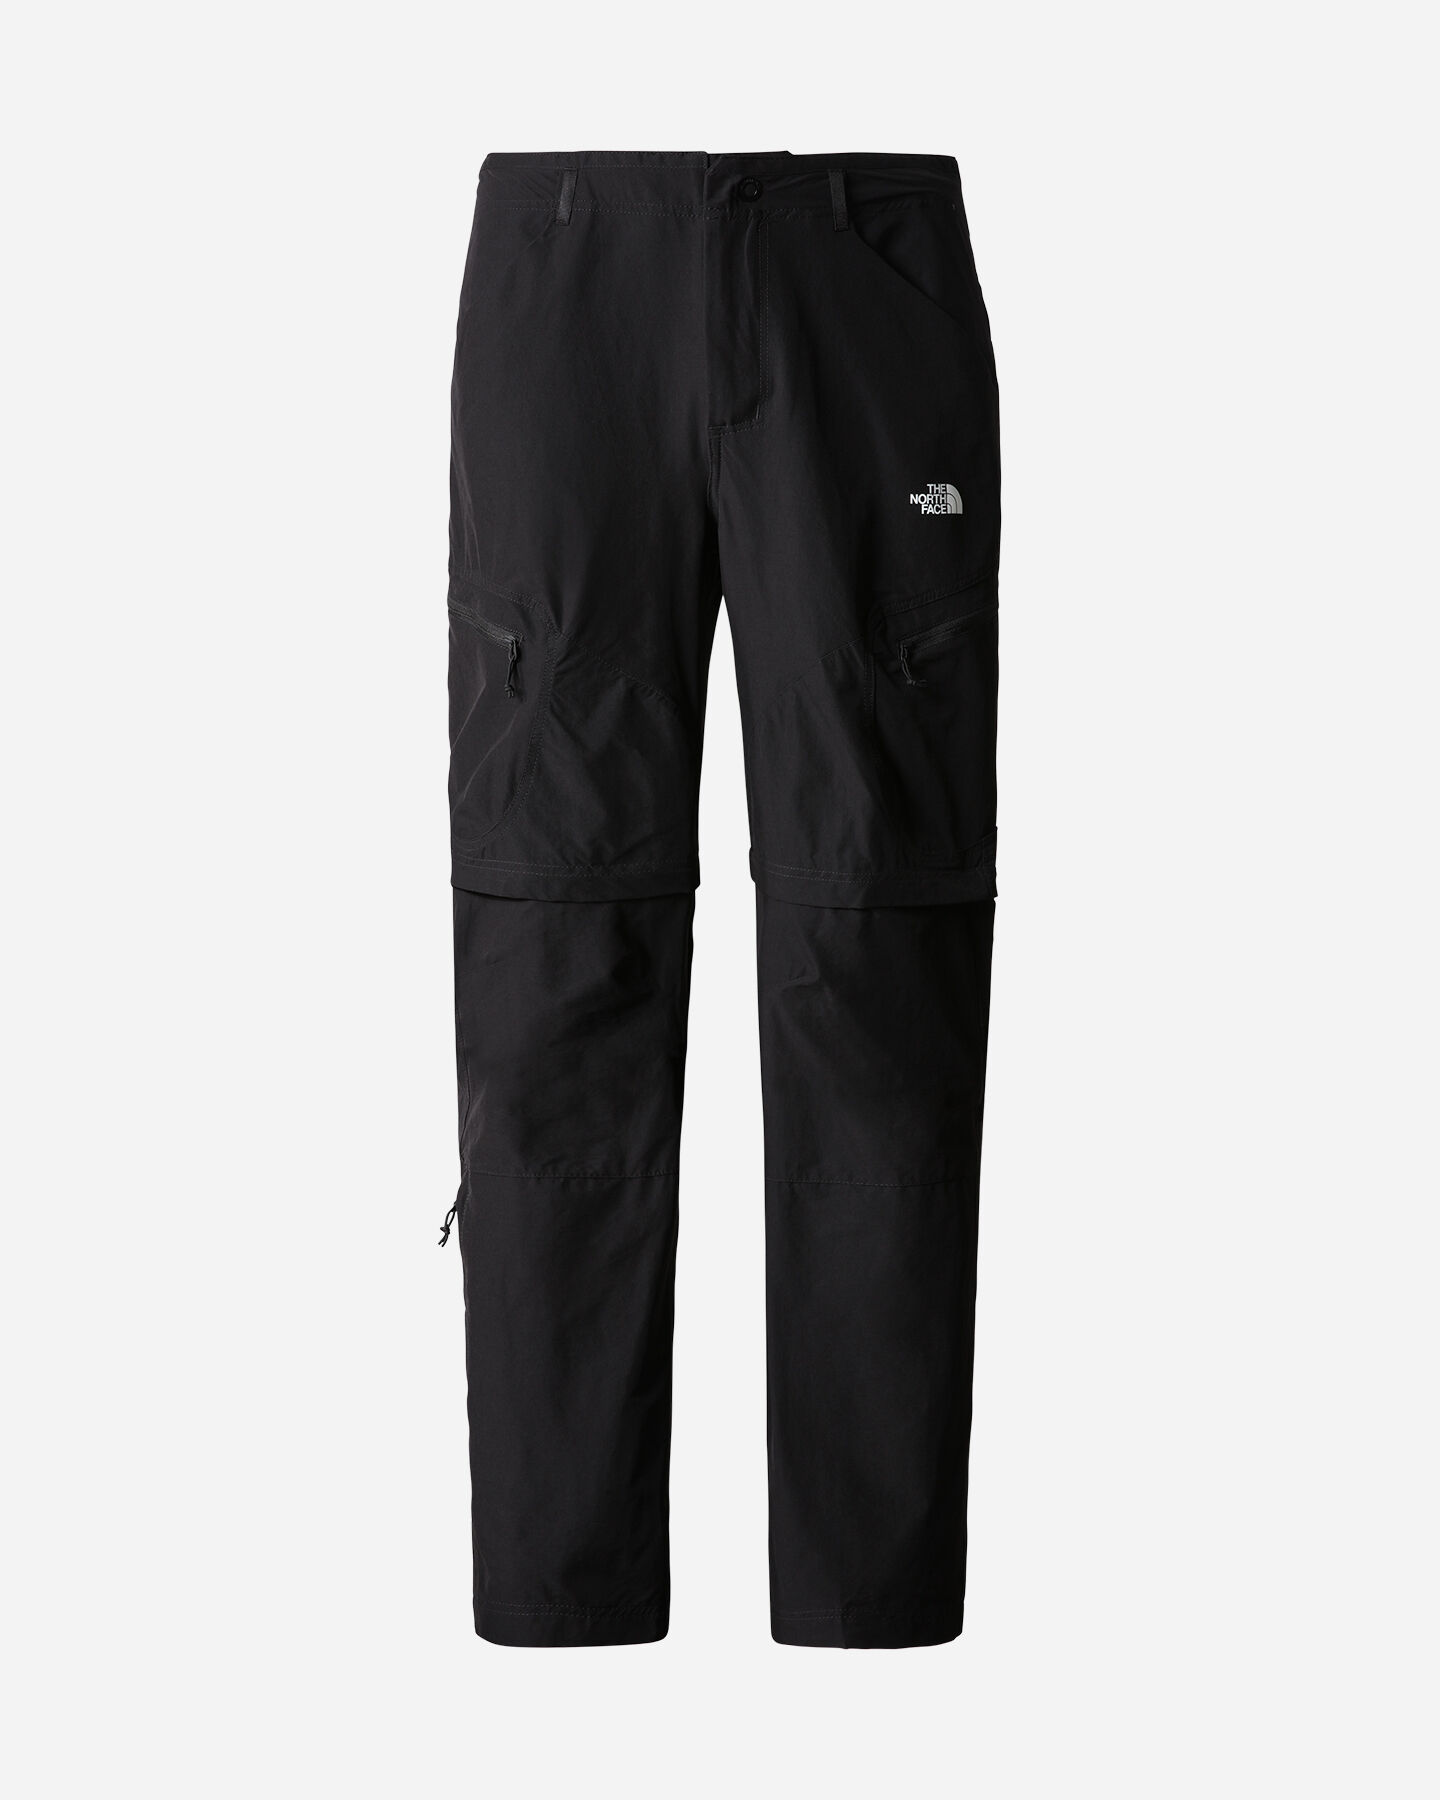  Pantalone outdoor THE NORTH FACE EXPLORATION CONVERTIBLE M S5476197|JK3|REG30 scatto 0